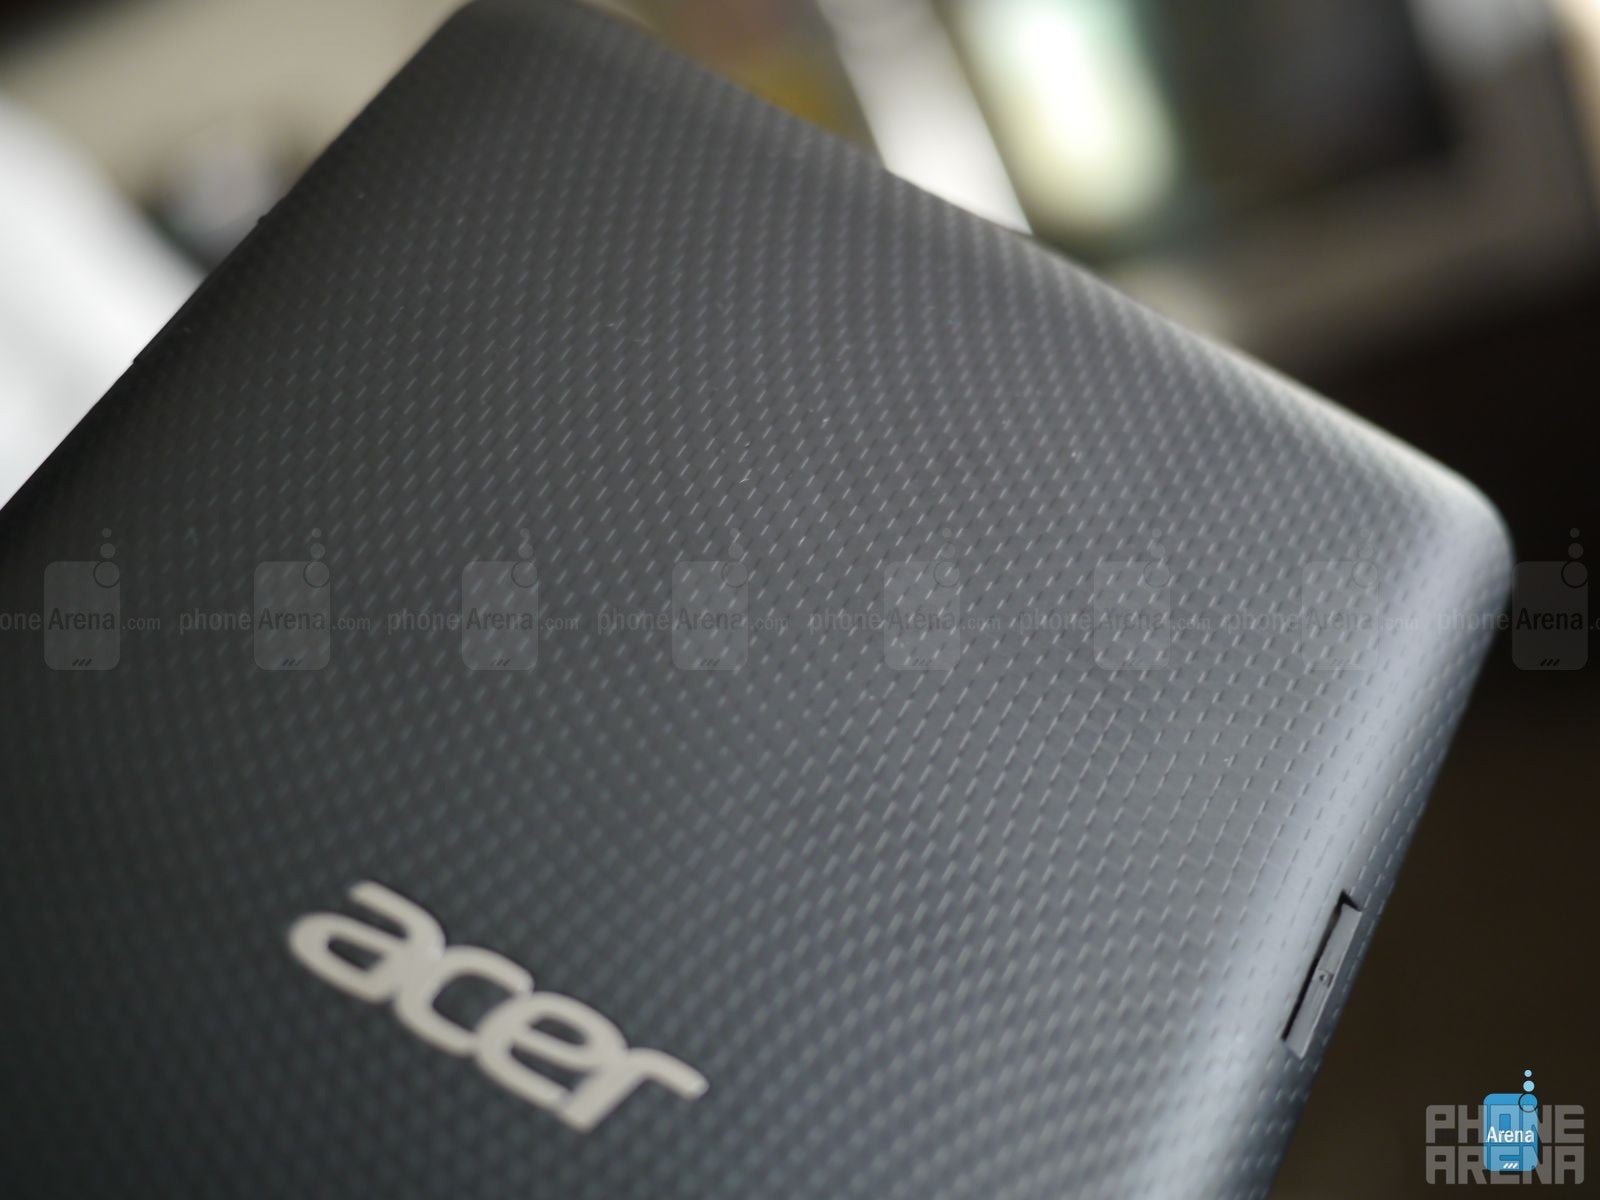 Textured back - Acer Iconia B1-720 hands-on